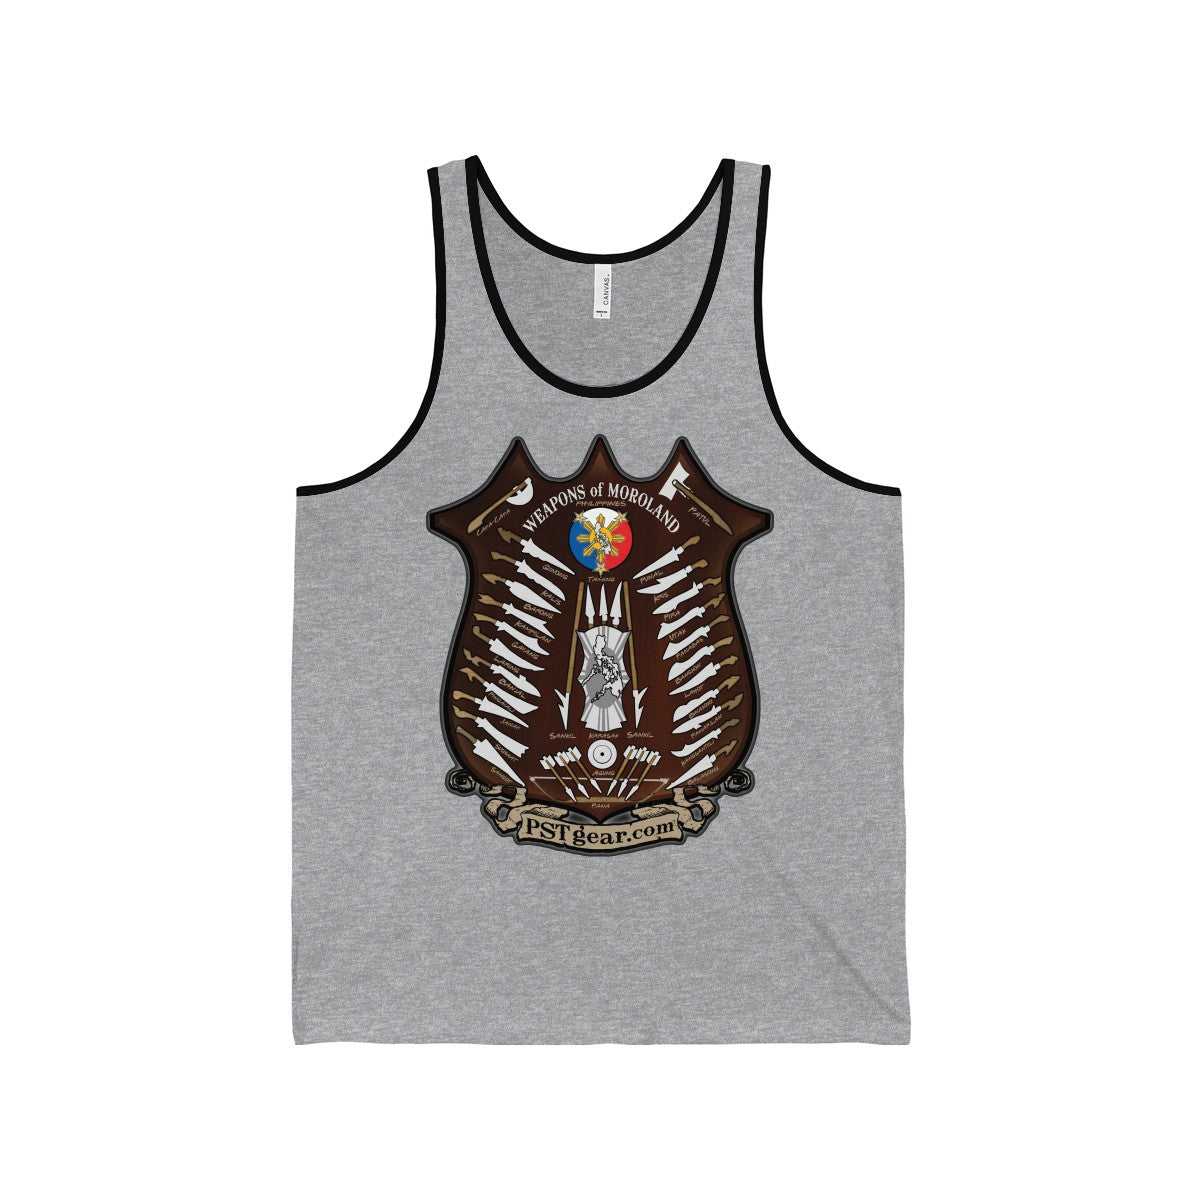 Weapons of Moroland Tank Top